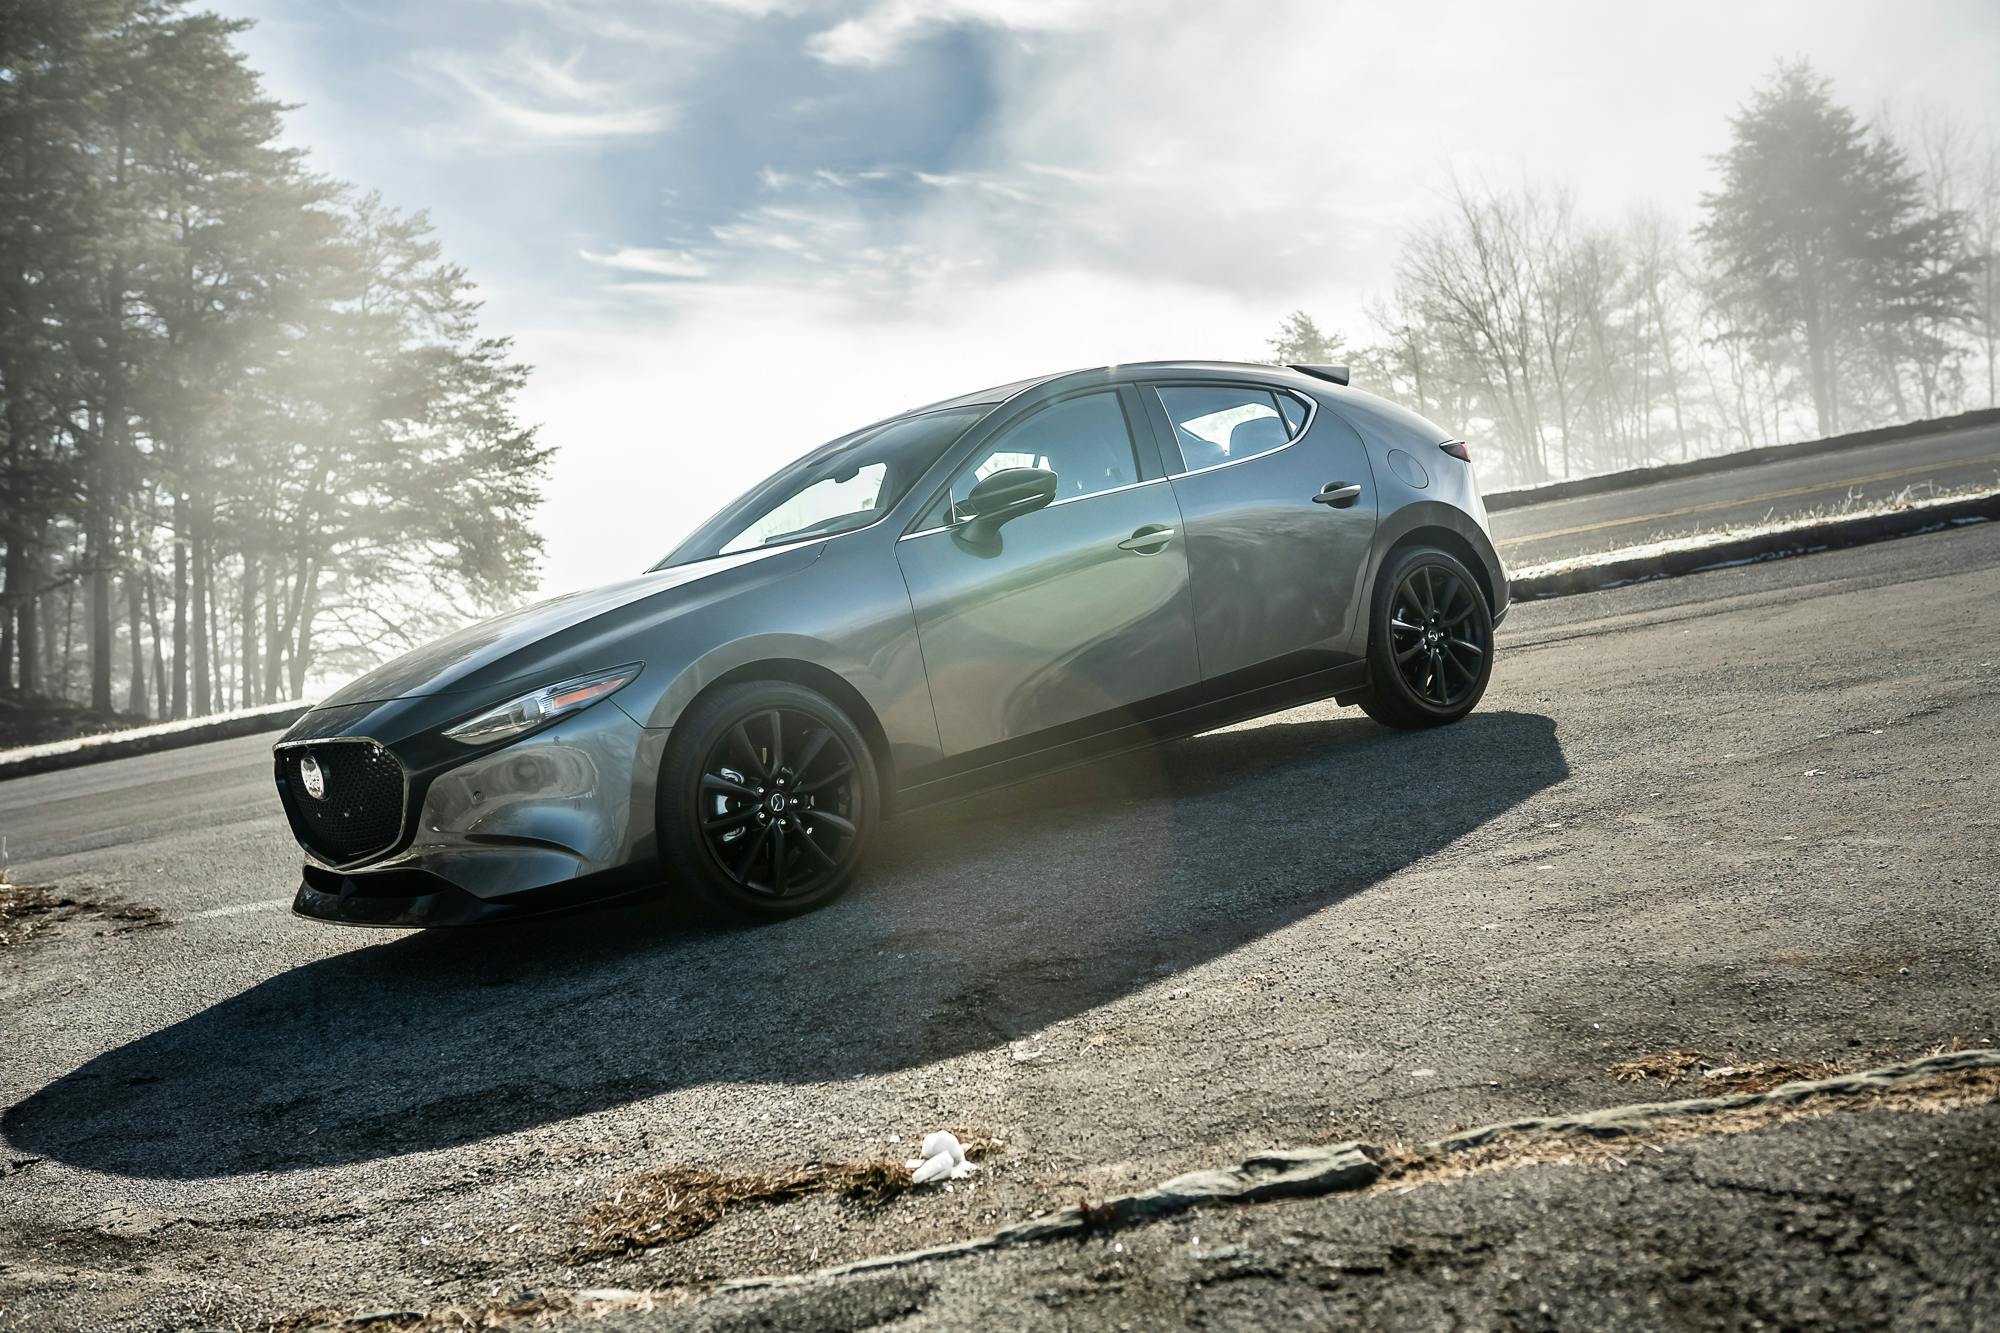 People asked for a Mazda 3 with more power: The 2021 Mazda 3 Turbo